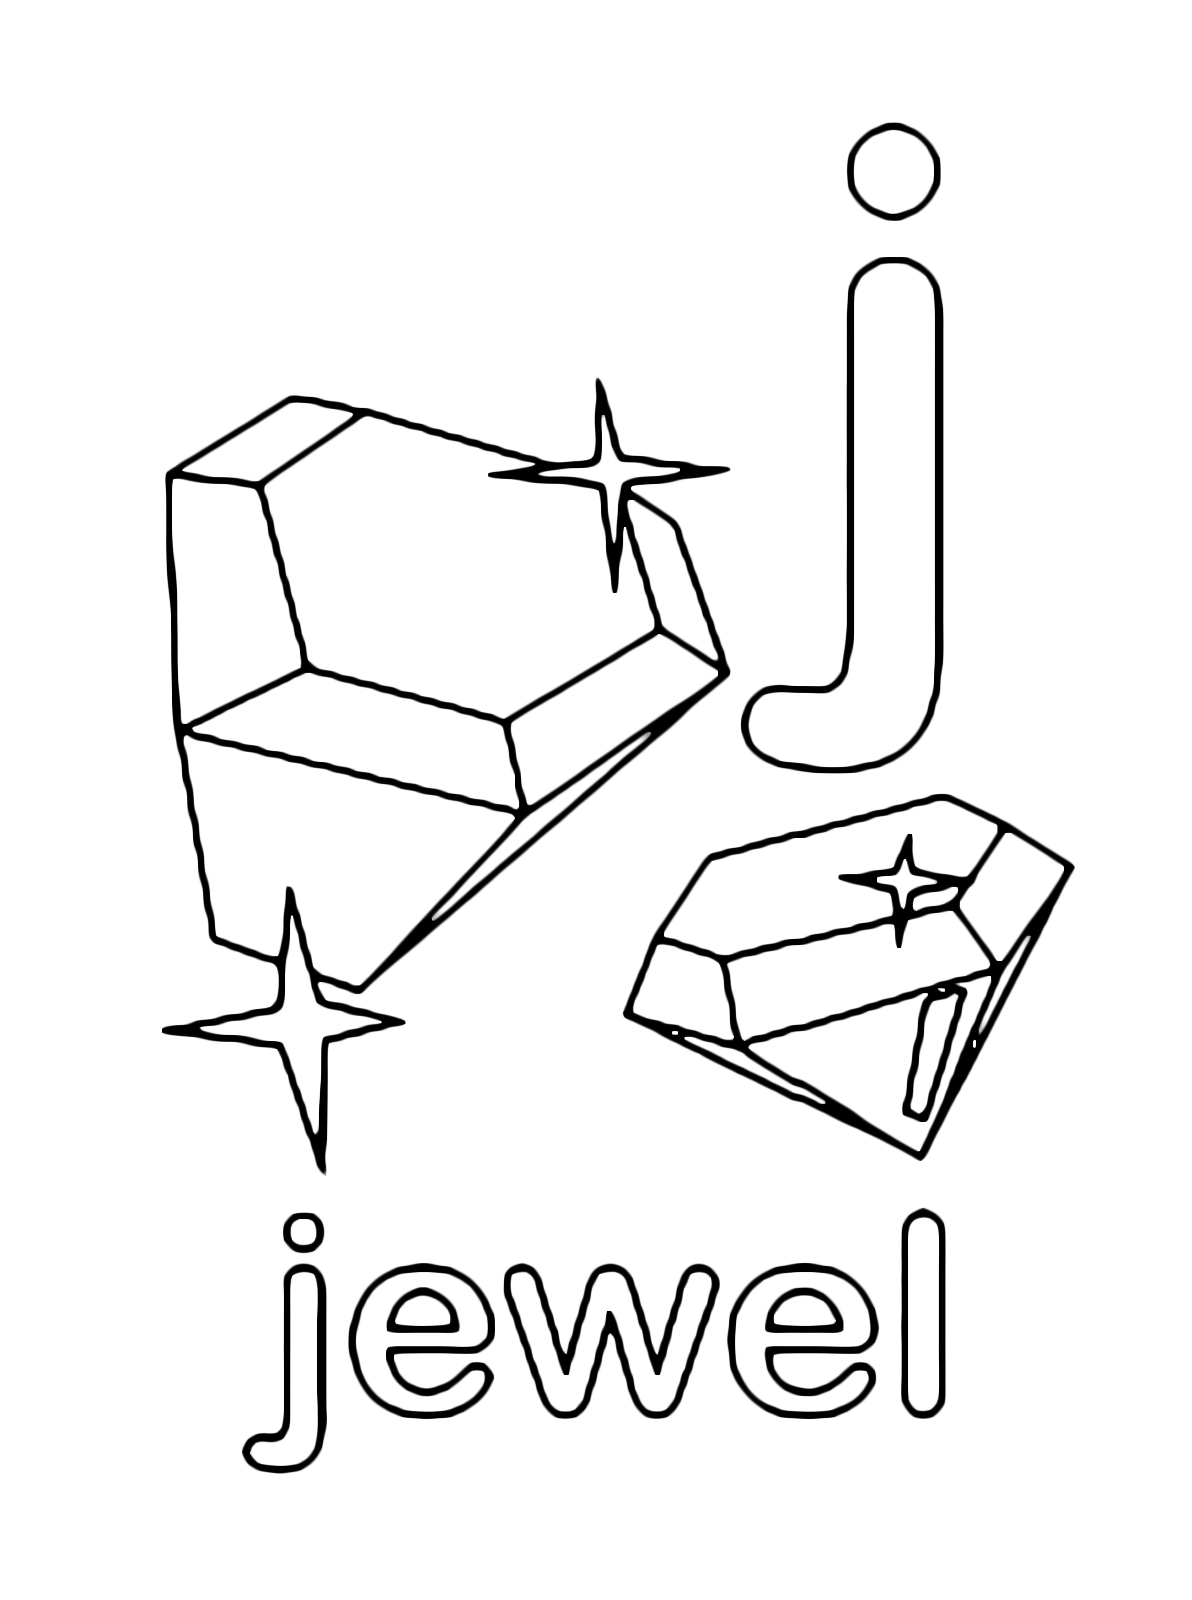 Letters and numbers - j for jewel lowercase letter